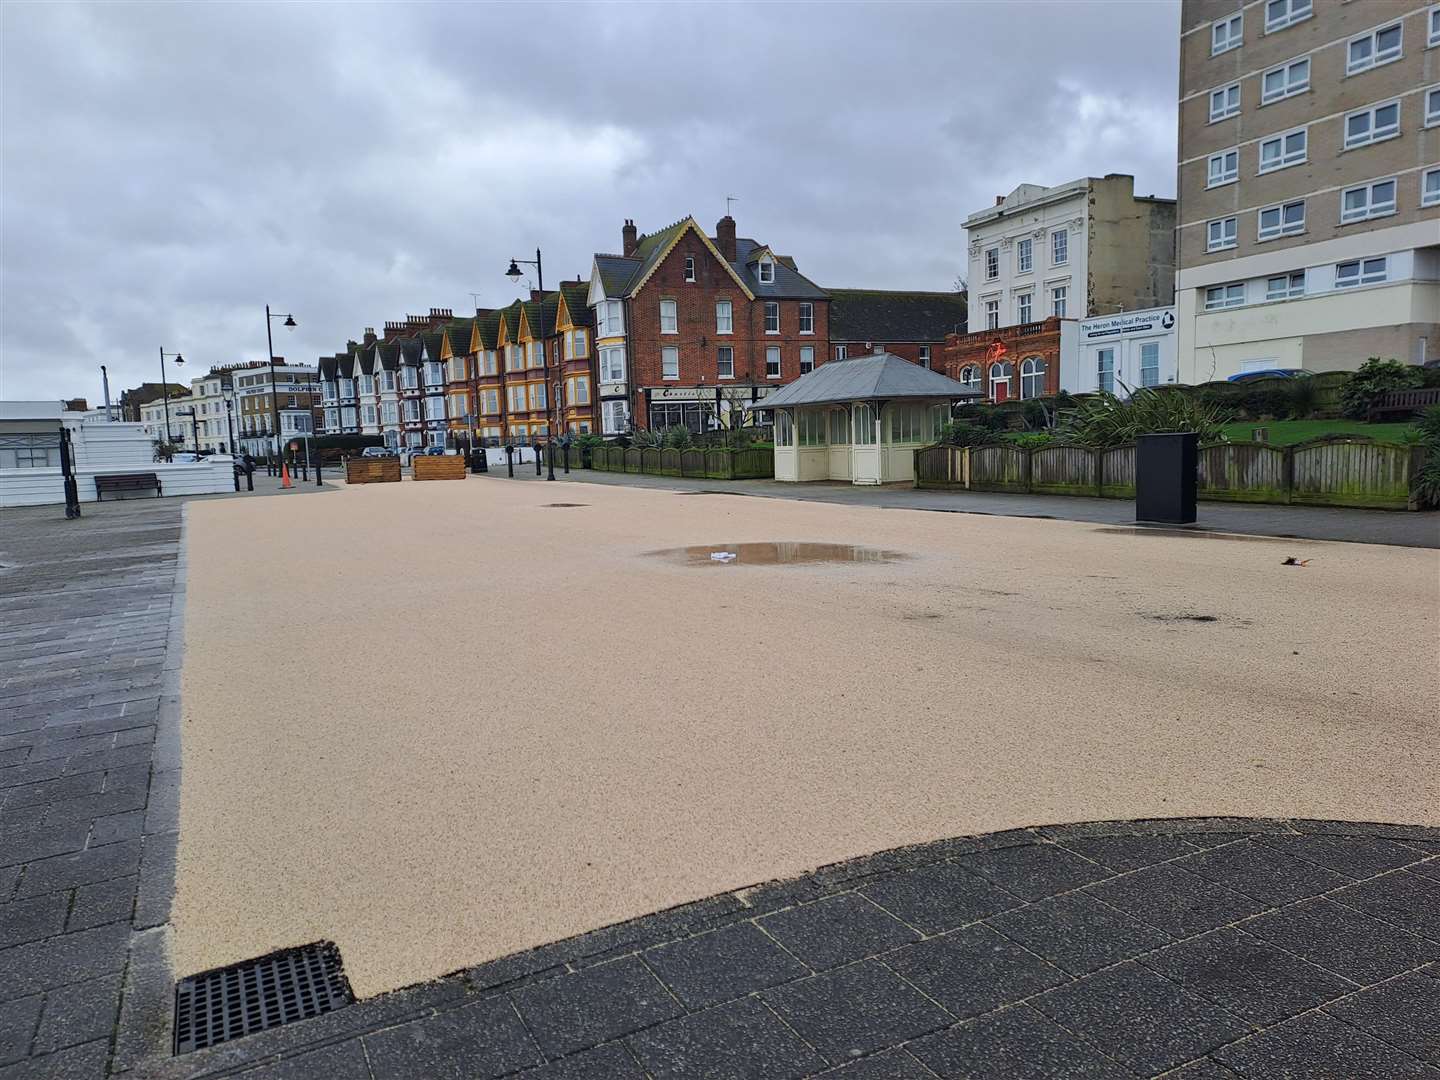 Part of Herne Bay’s seafront has been blocked off to create a Spanish-style plaza for a £600,000 project